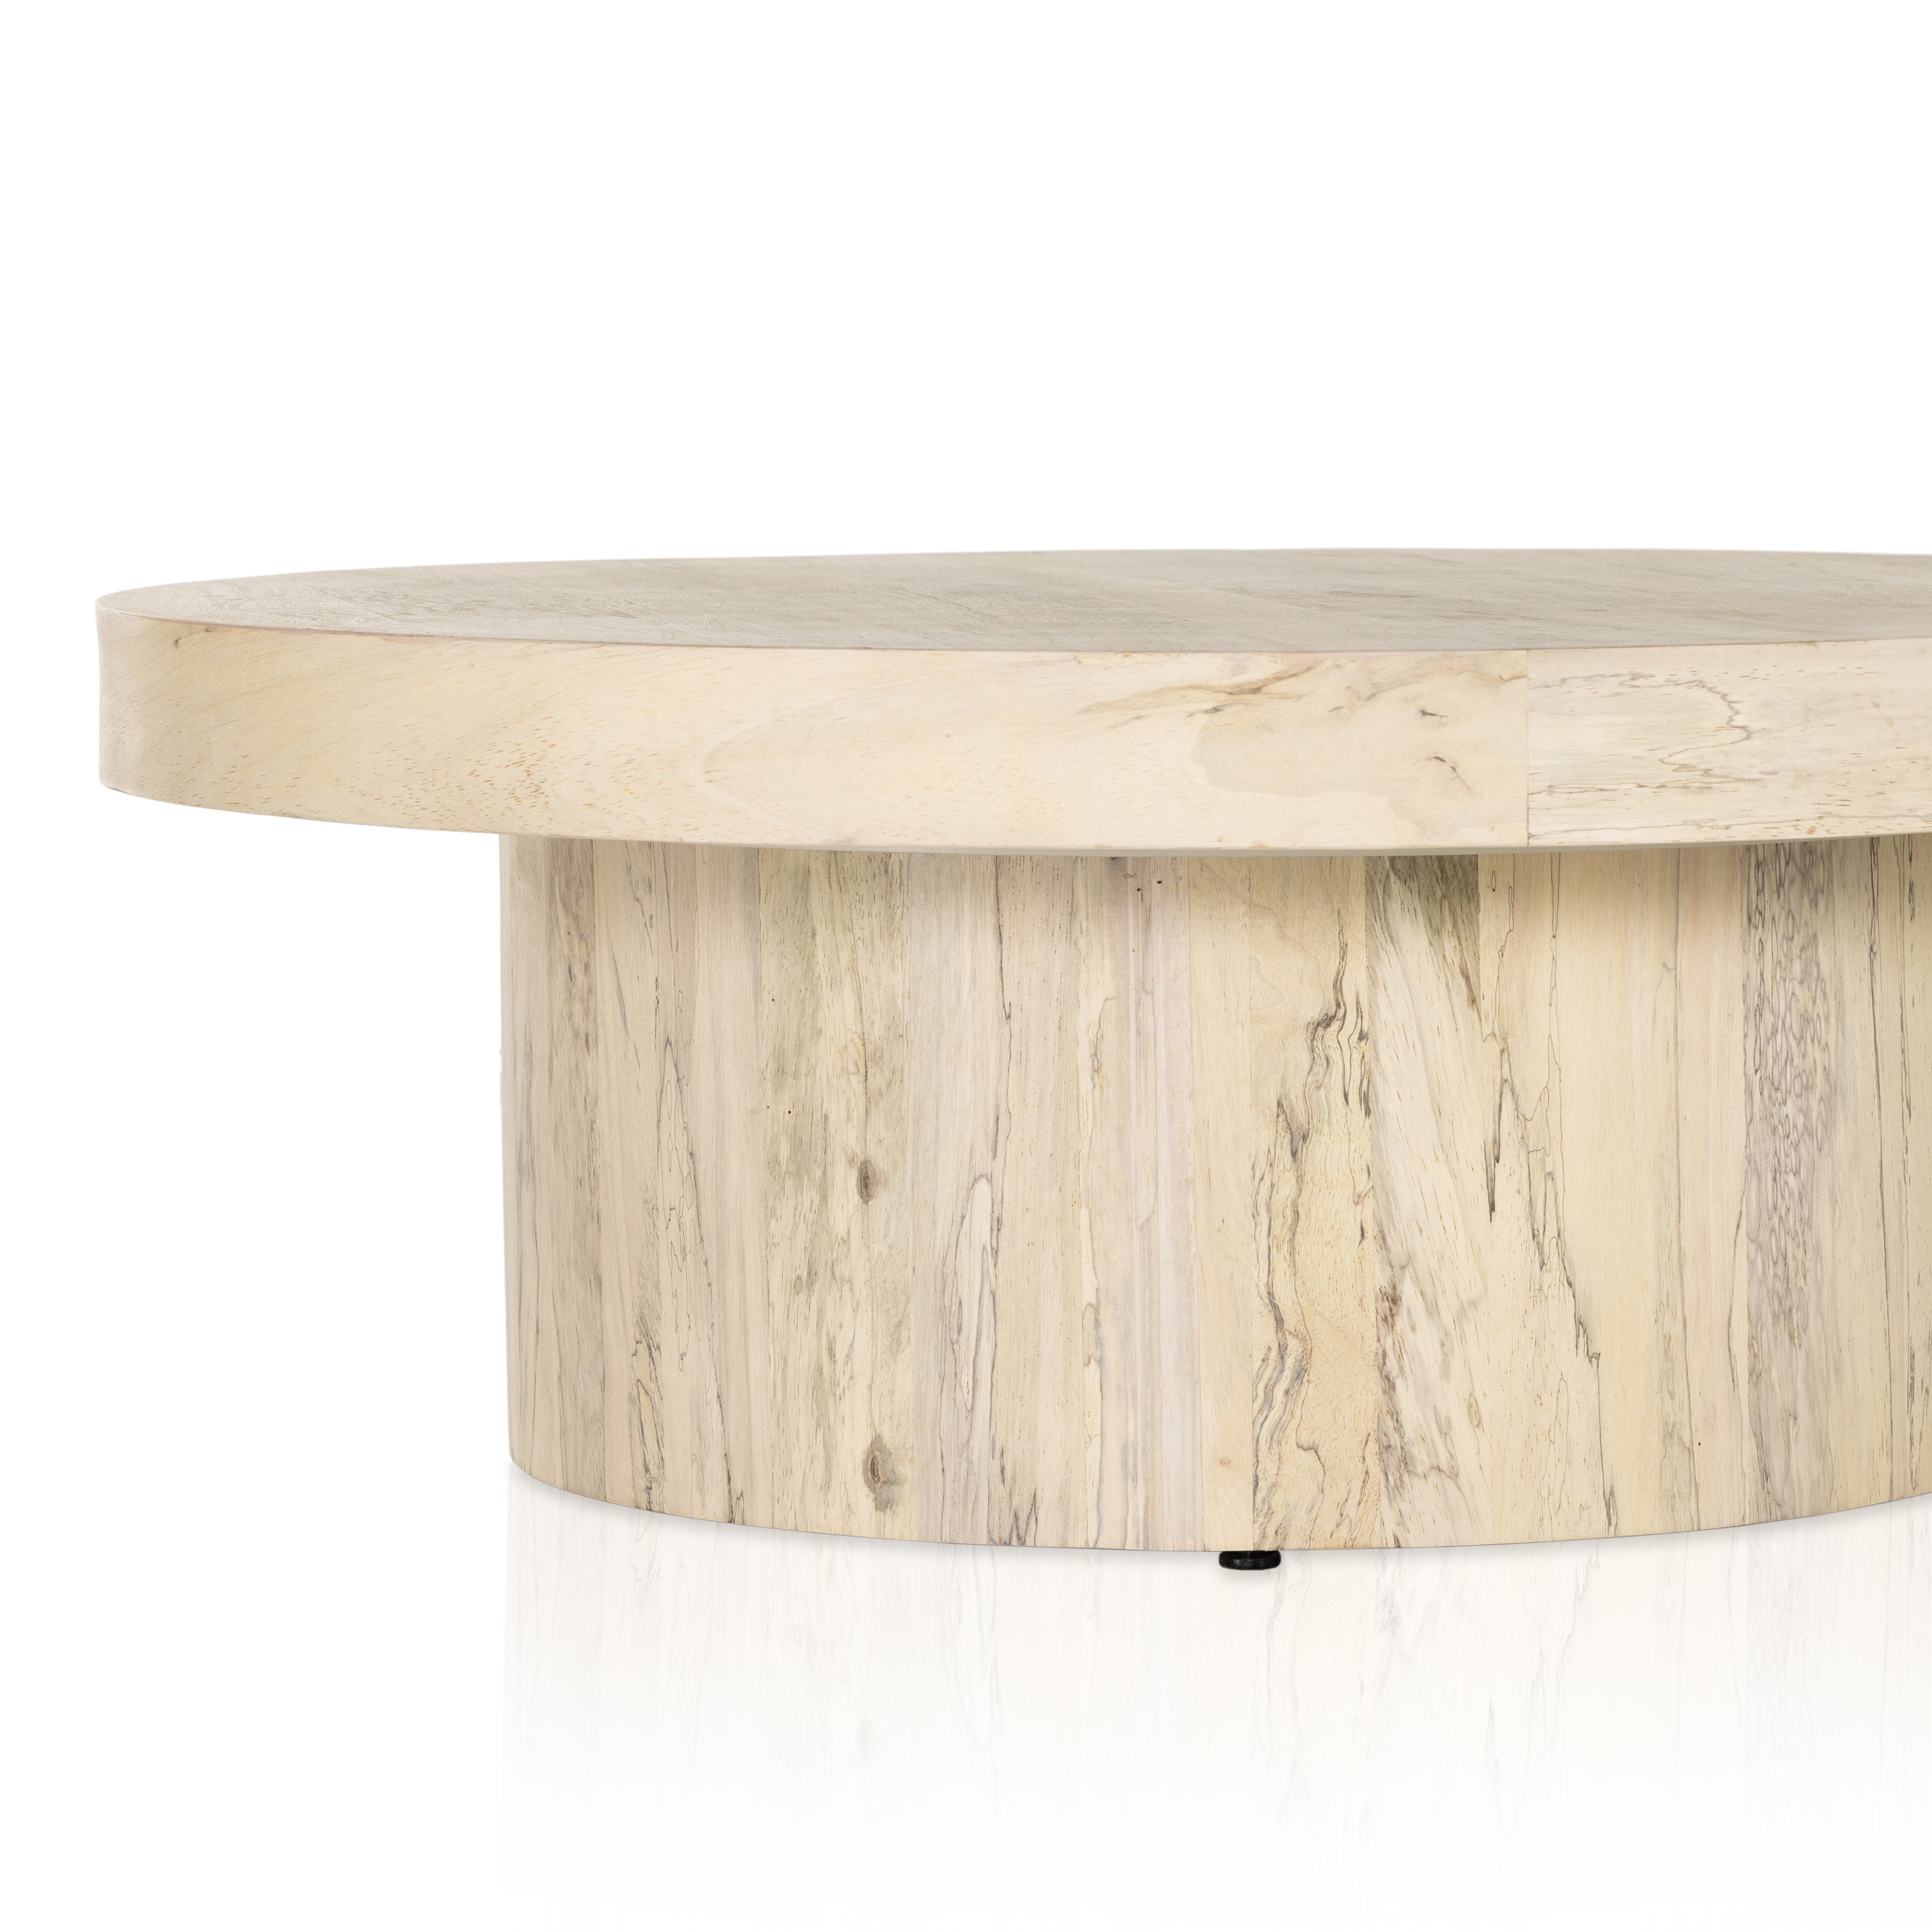 Stunning forces of nature are captured in a drum-style pedestal coffee table, natural yukas veneer is hand-shaped into a beautifully rounded silhouette for a warm, natural ombre look. Reflective of woods' natural character, a slight color variance is possible from piece to piece. Amethyst Home provides interior design, new home construction design consulting, vintage area rugs, and lighting in the Miami metro area.